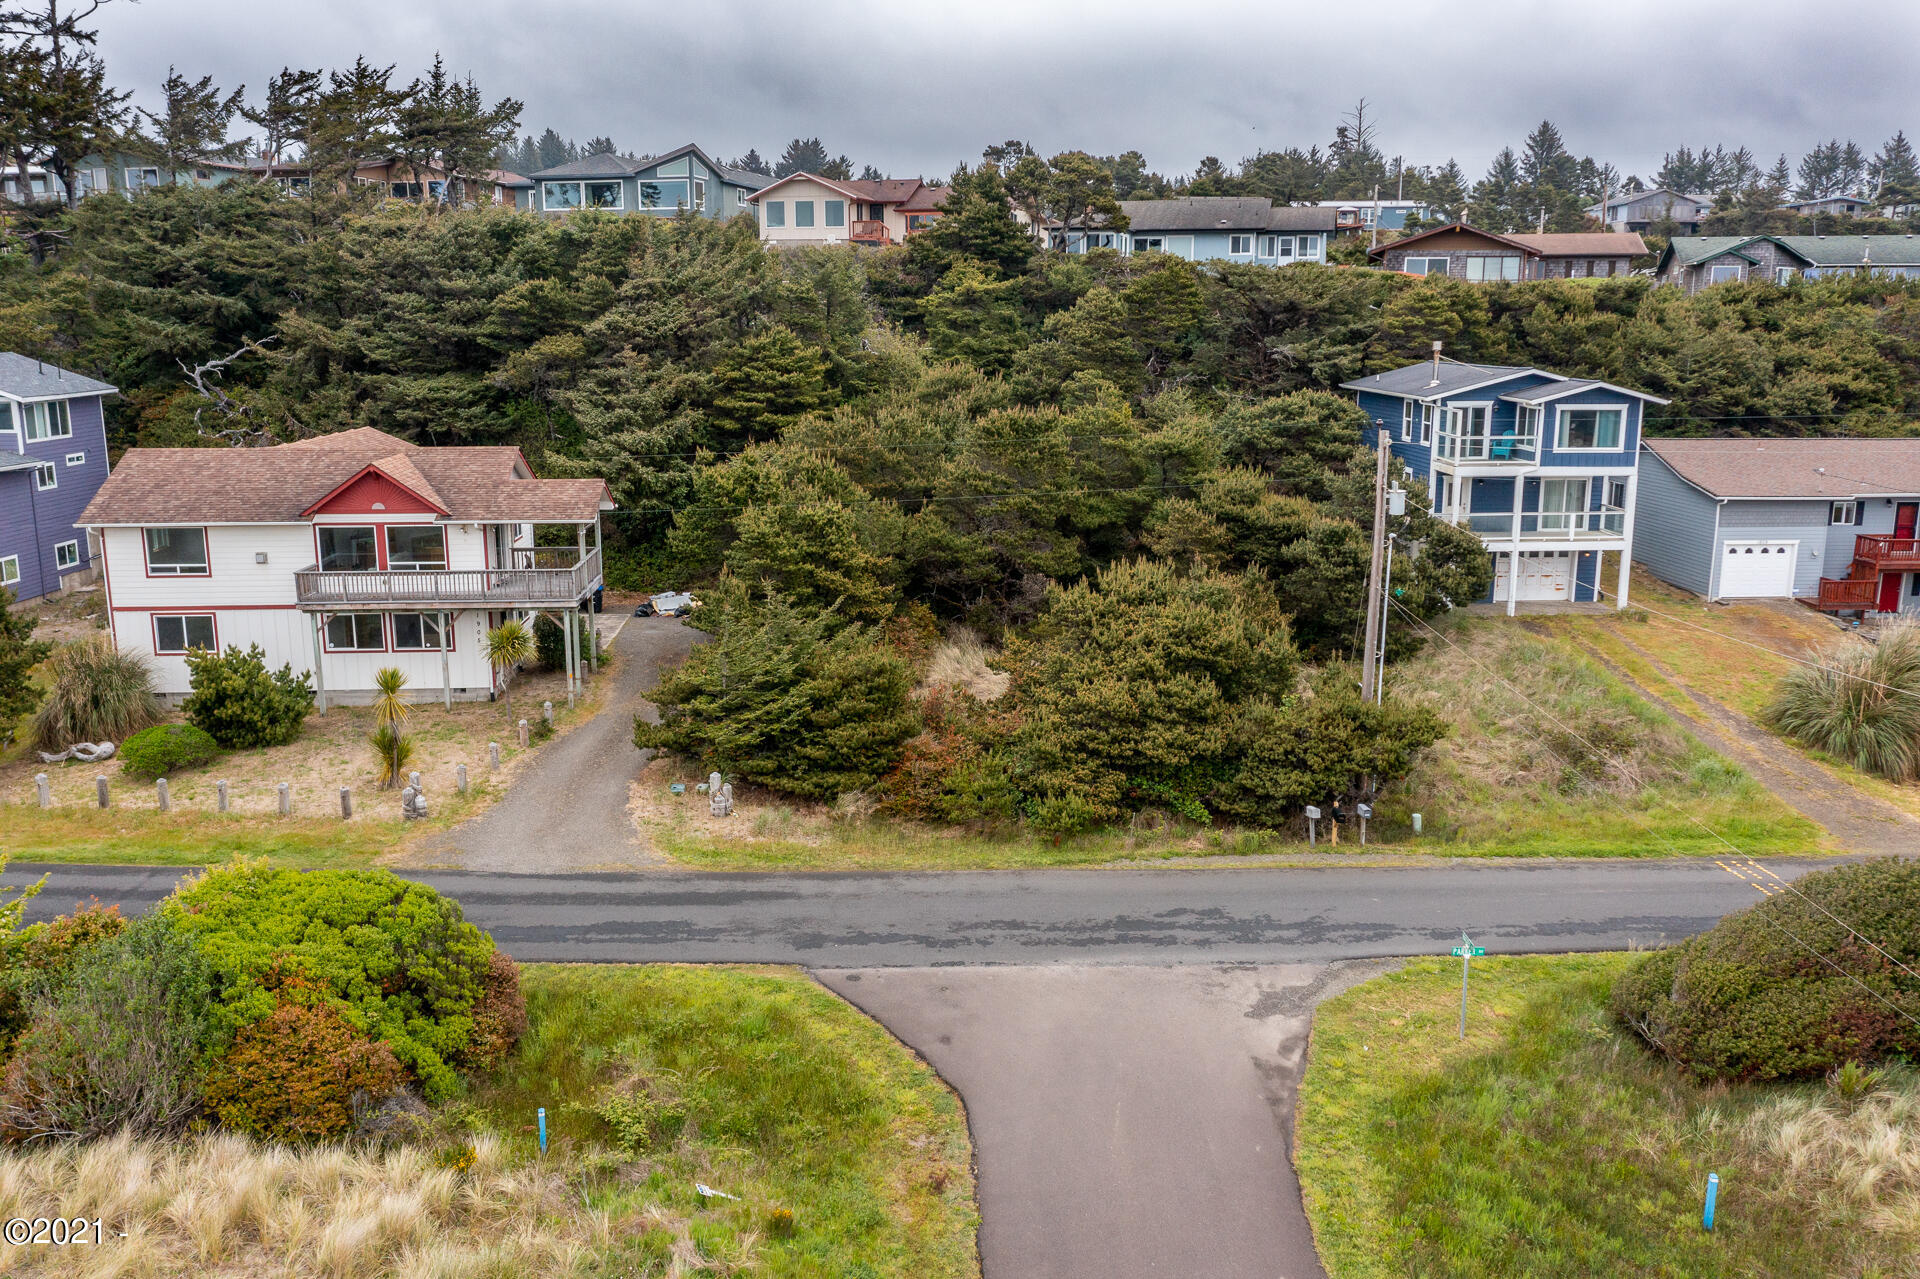 1901 NW Parker Ave Depoe Bay, Gleneden Beach, Lincoln City, Newport, Otis, Rose Lodge, Seal Rock, Waldport, Yachats, To Home Listings - Amy Plechaty, Emerald Coast Realty Real Estate, homes for sale, property for sale